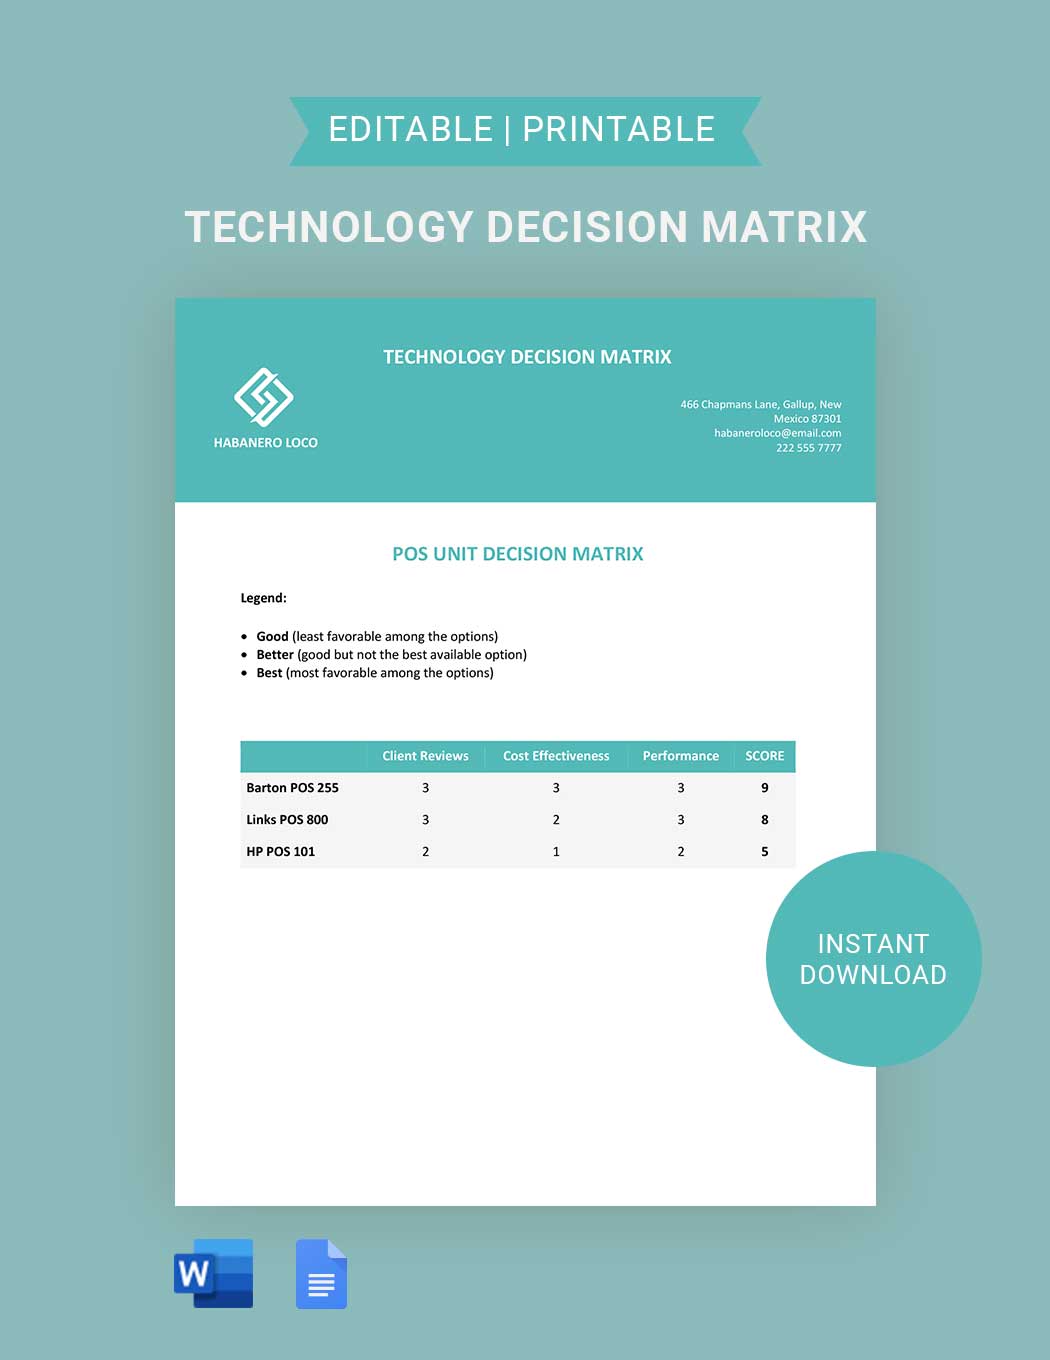 Free Technology Decision Matrix Template in Word, Google Docs